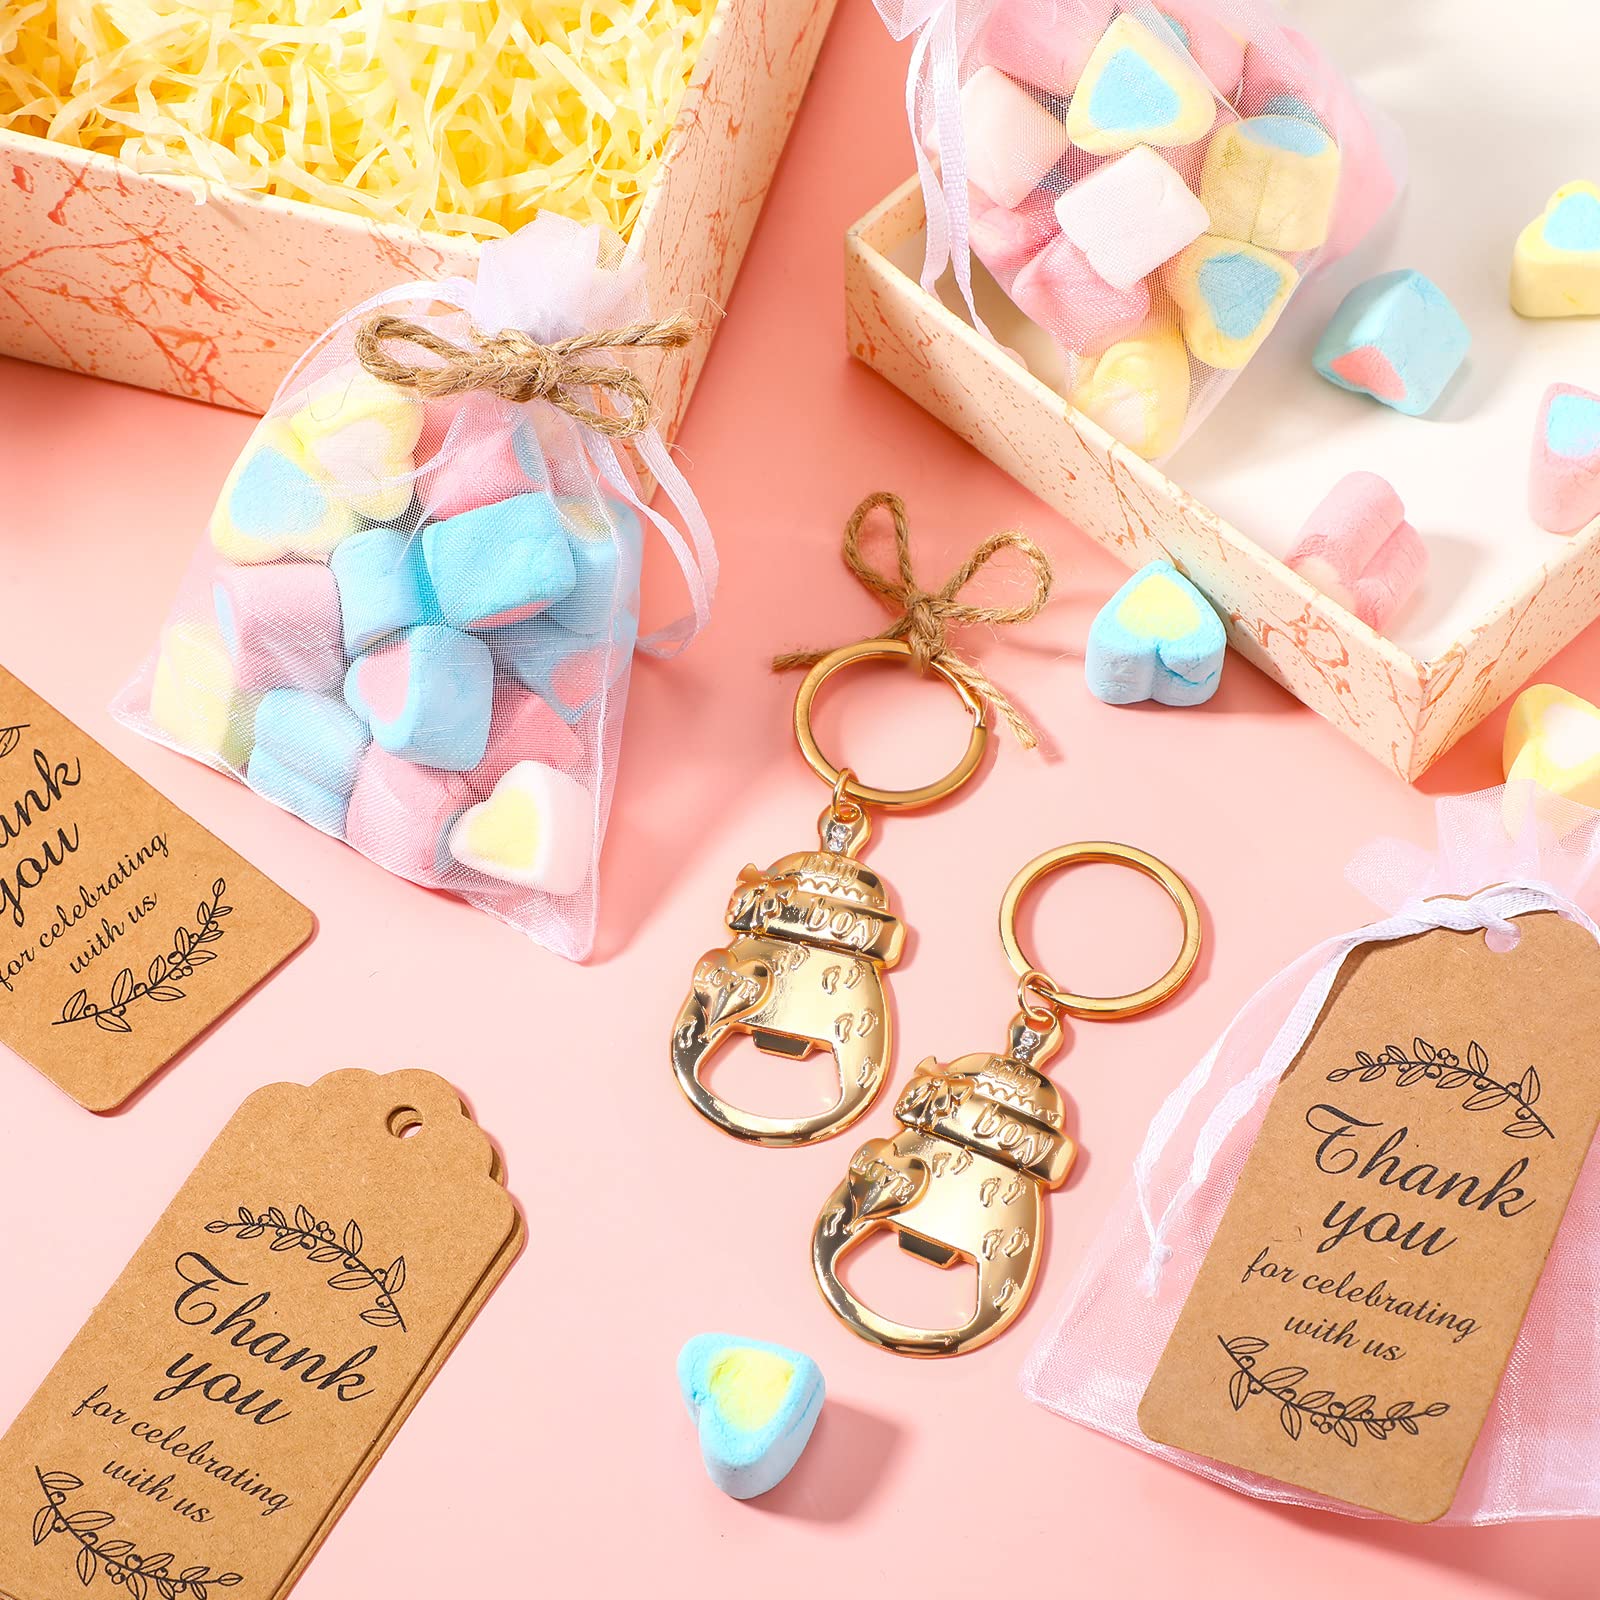 Boy Baby Shower Party Favor, Includes 15 Pieces Baby Bottle Opener Keychain, Organza Bags, Thank You Tags, Baby Shower Return Gifts for Guests Cute Bottle Opener Decorations and Souvenirs